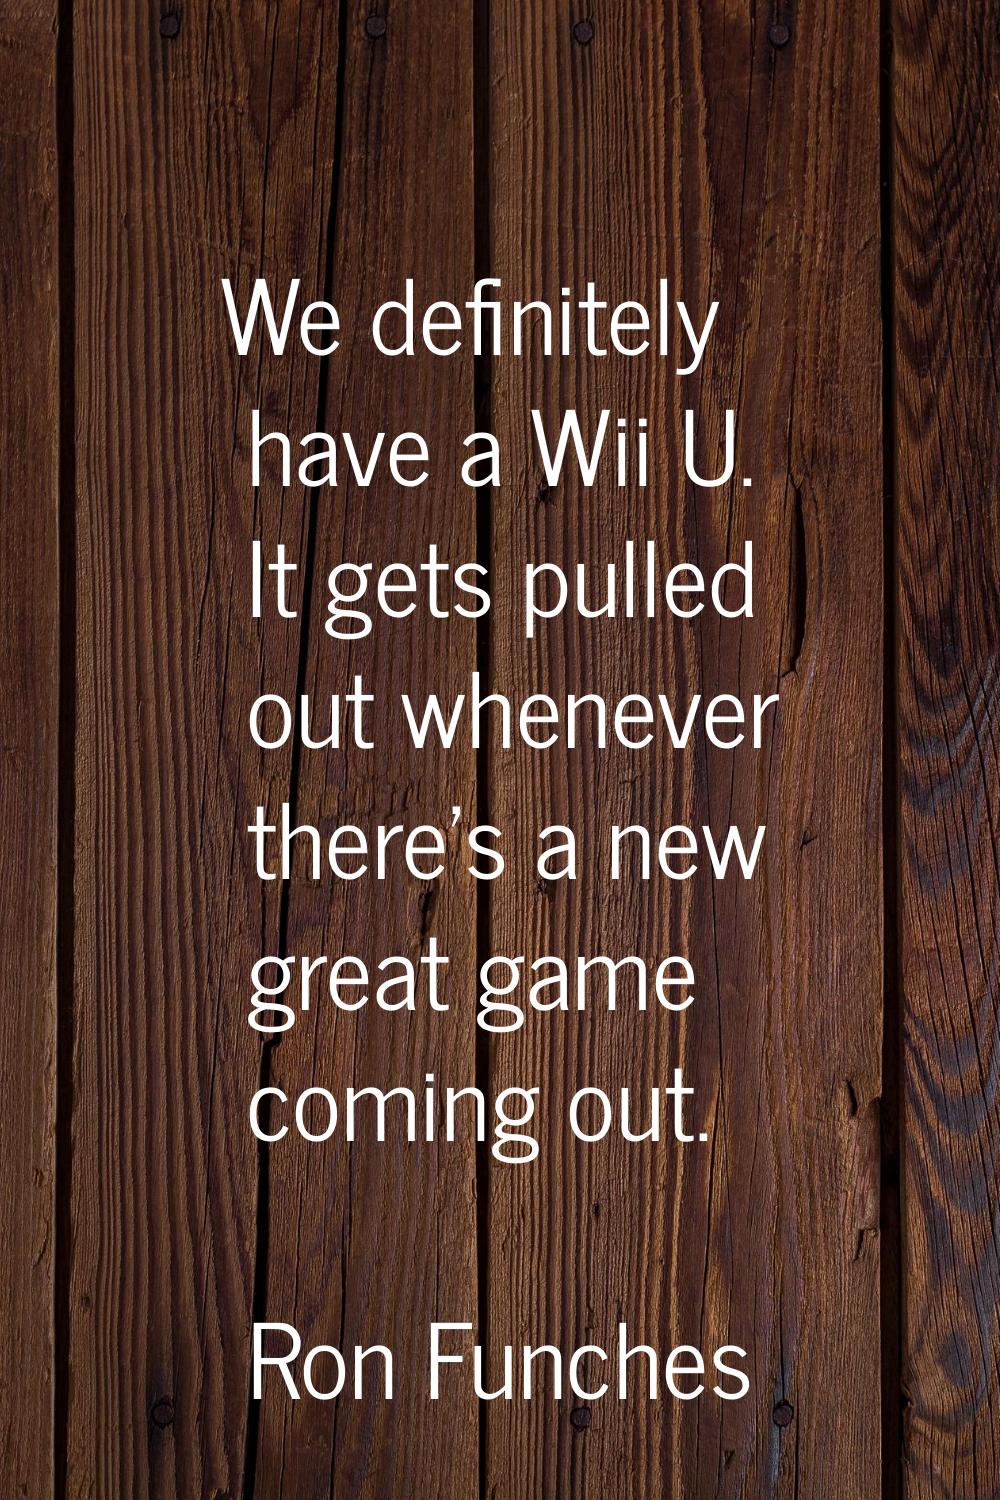 We definitely have a Wii U. It gets pulled out whenever there's a new great game coming out.